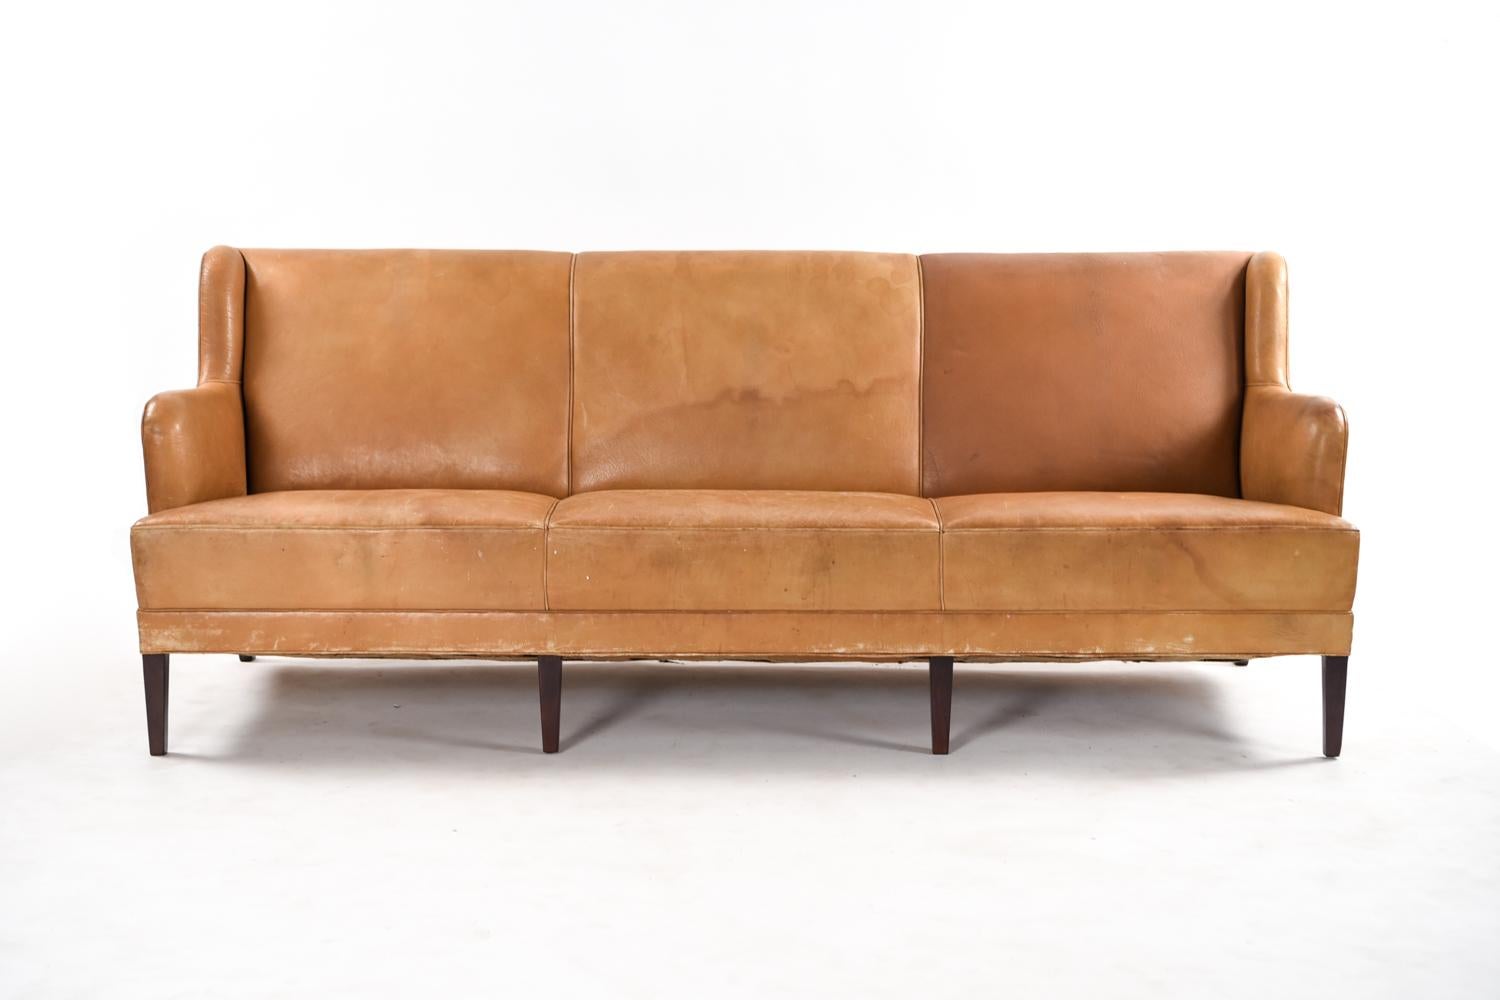 This three-seat sofa by Frits Henningsen has the original leather upholstery with incredible patination and mahogany legs. A wonderful example of early Danish modern design and production, with an art deco reminiscent shape of the body.